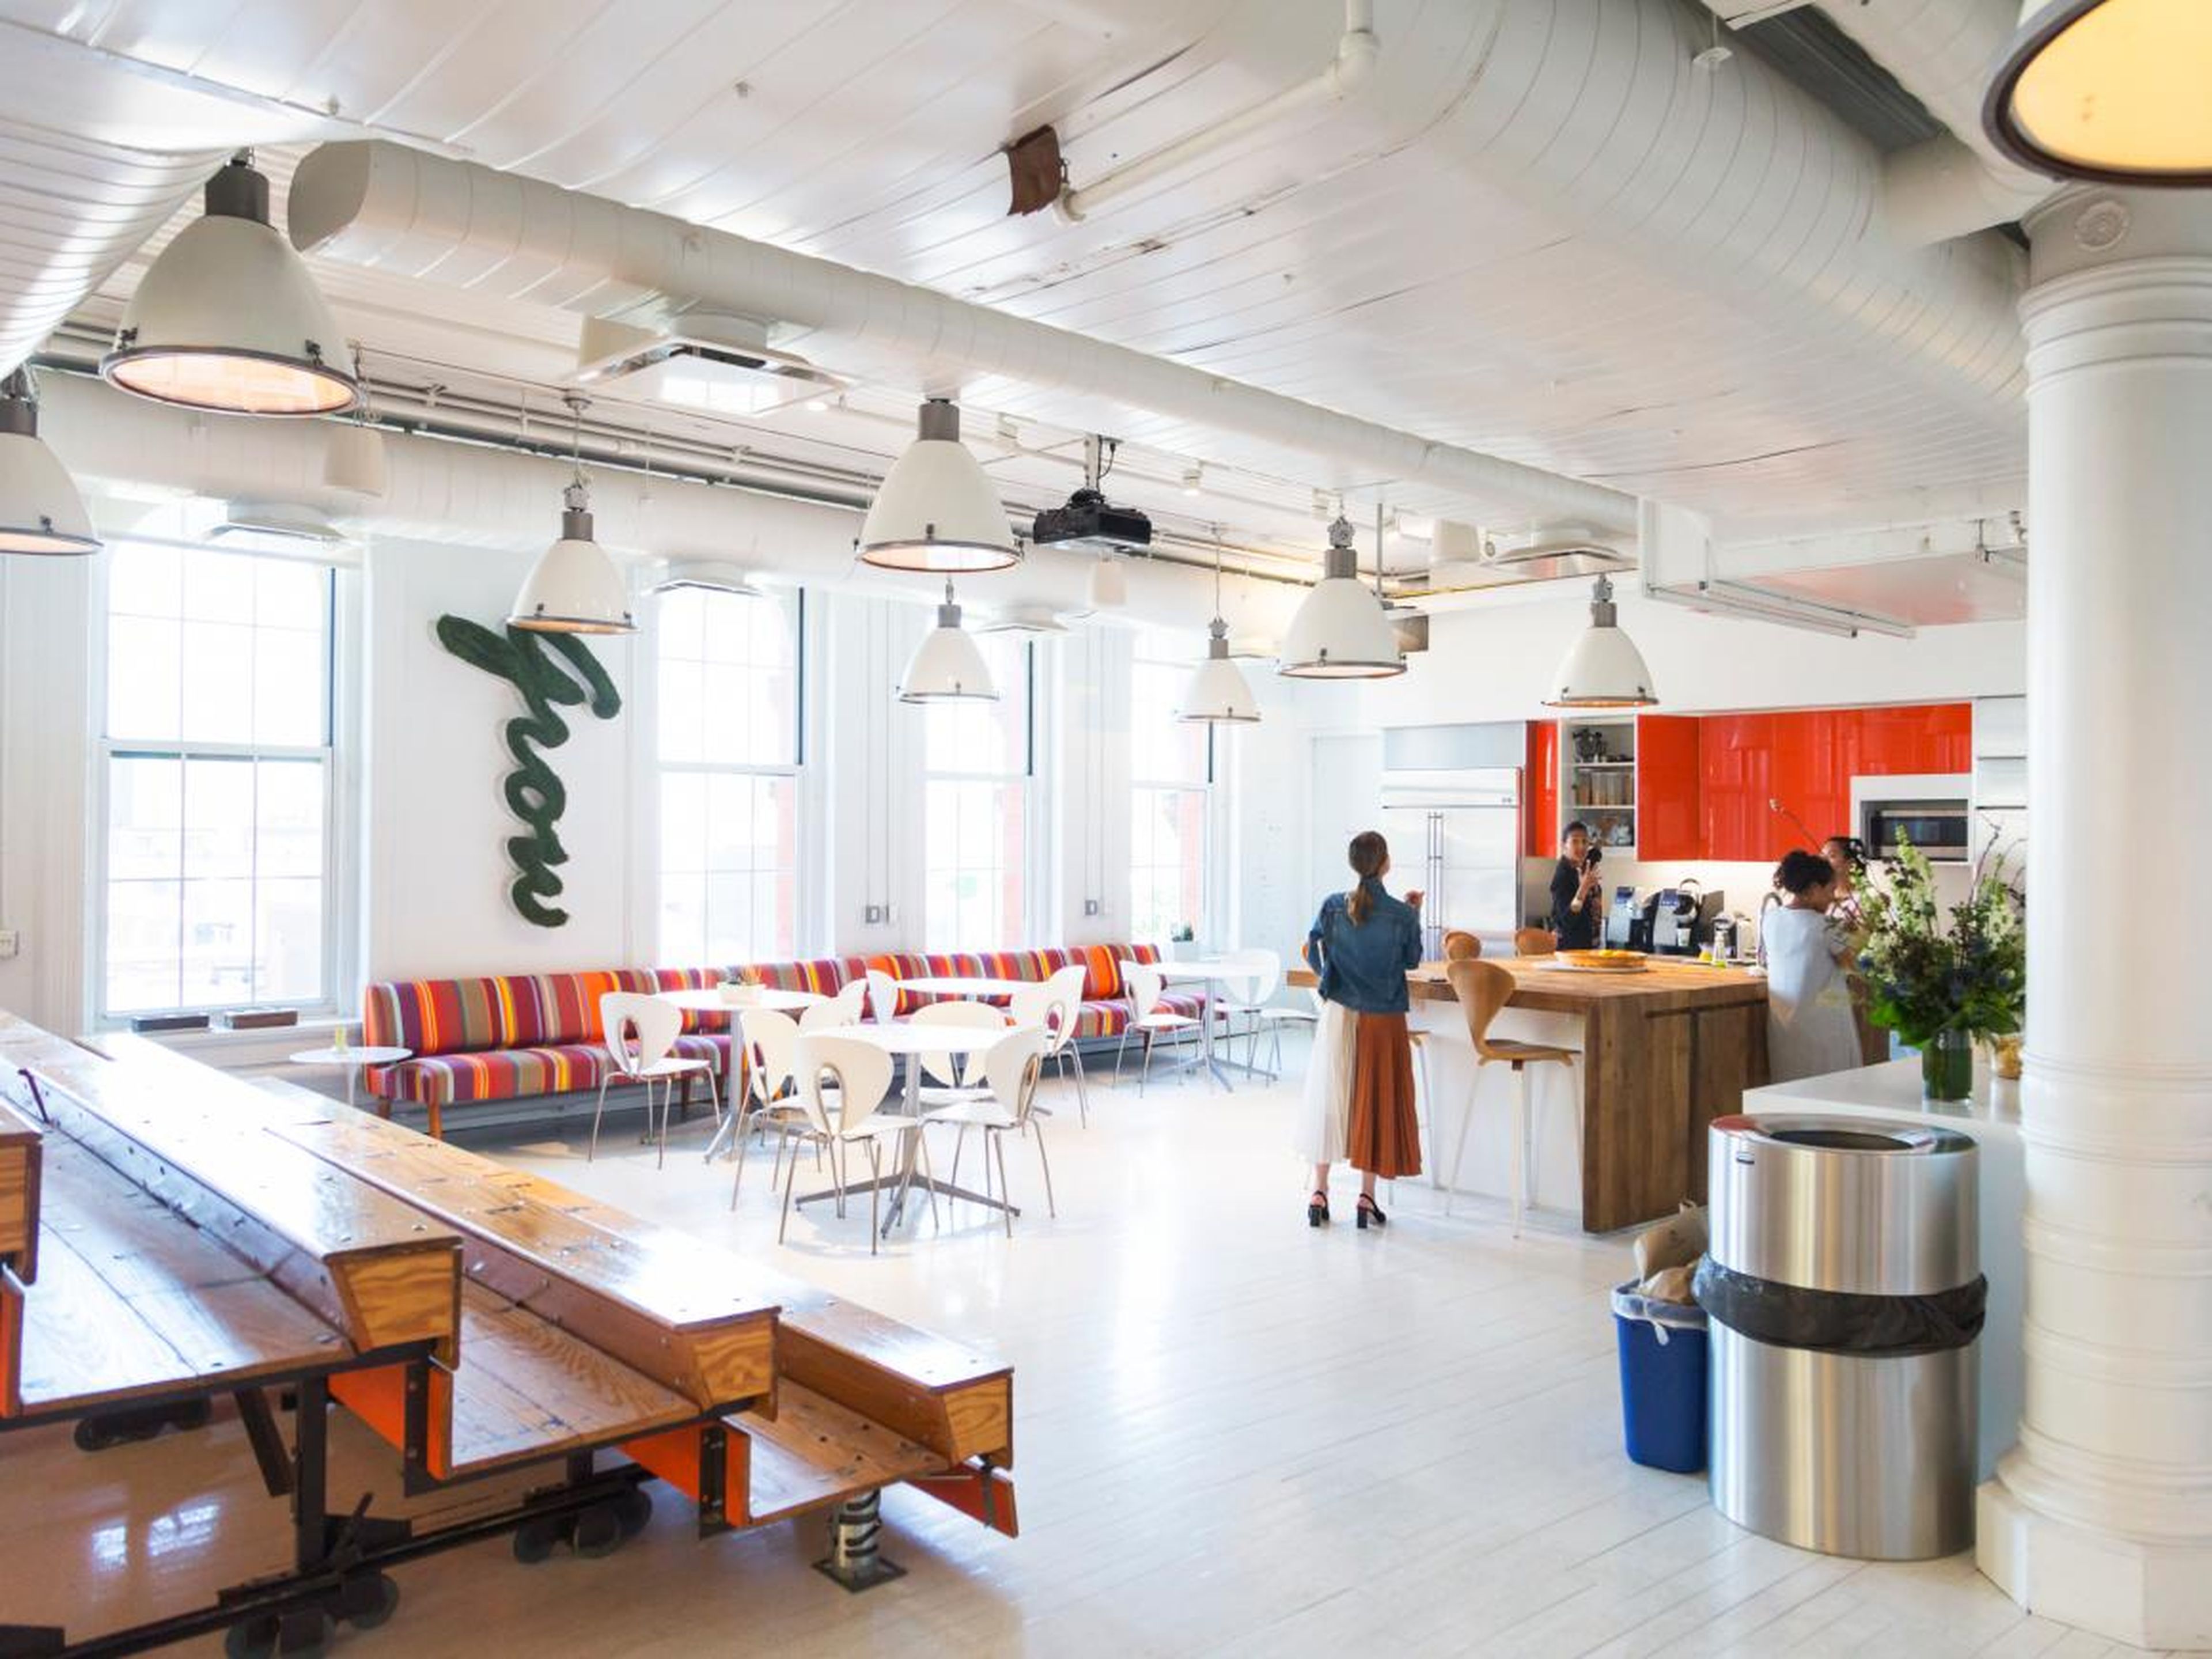 Axiom's office reinforces the company's open, innovative culture.